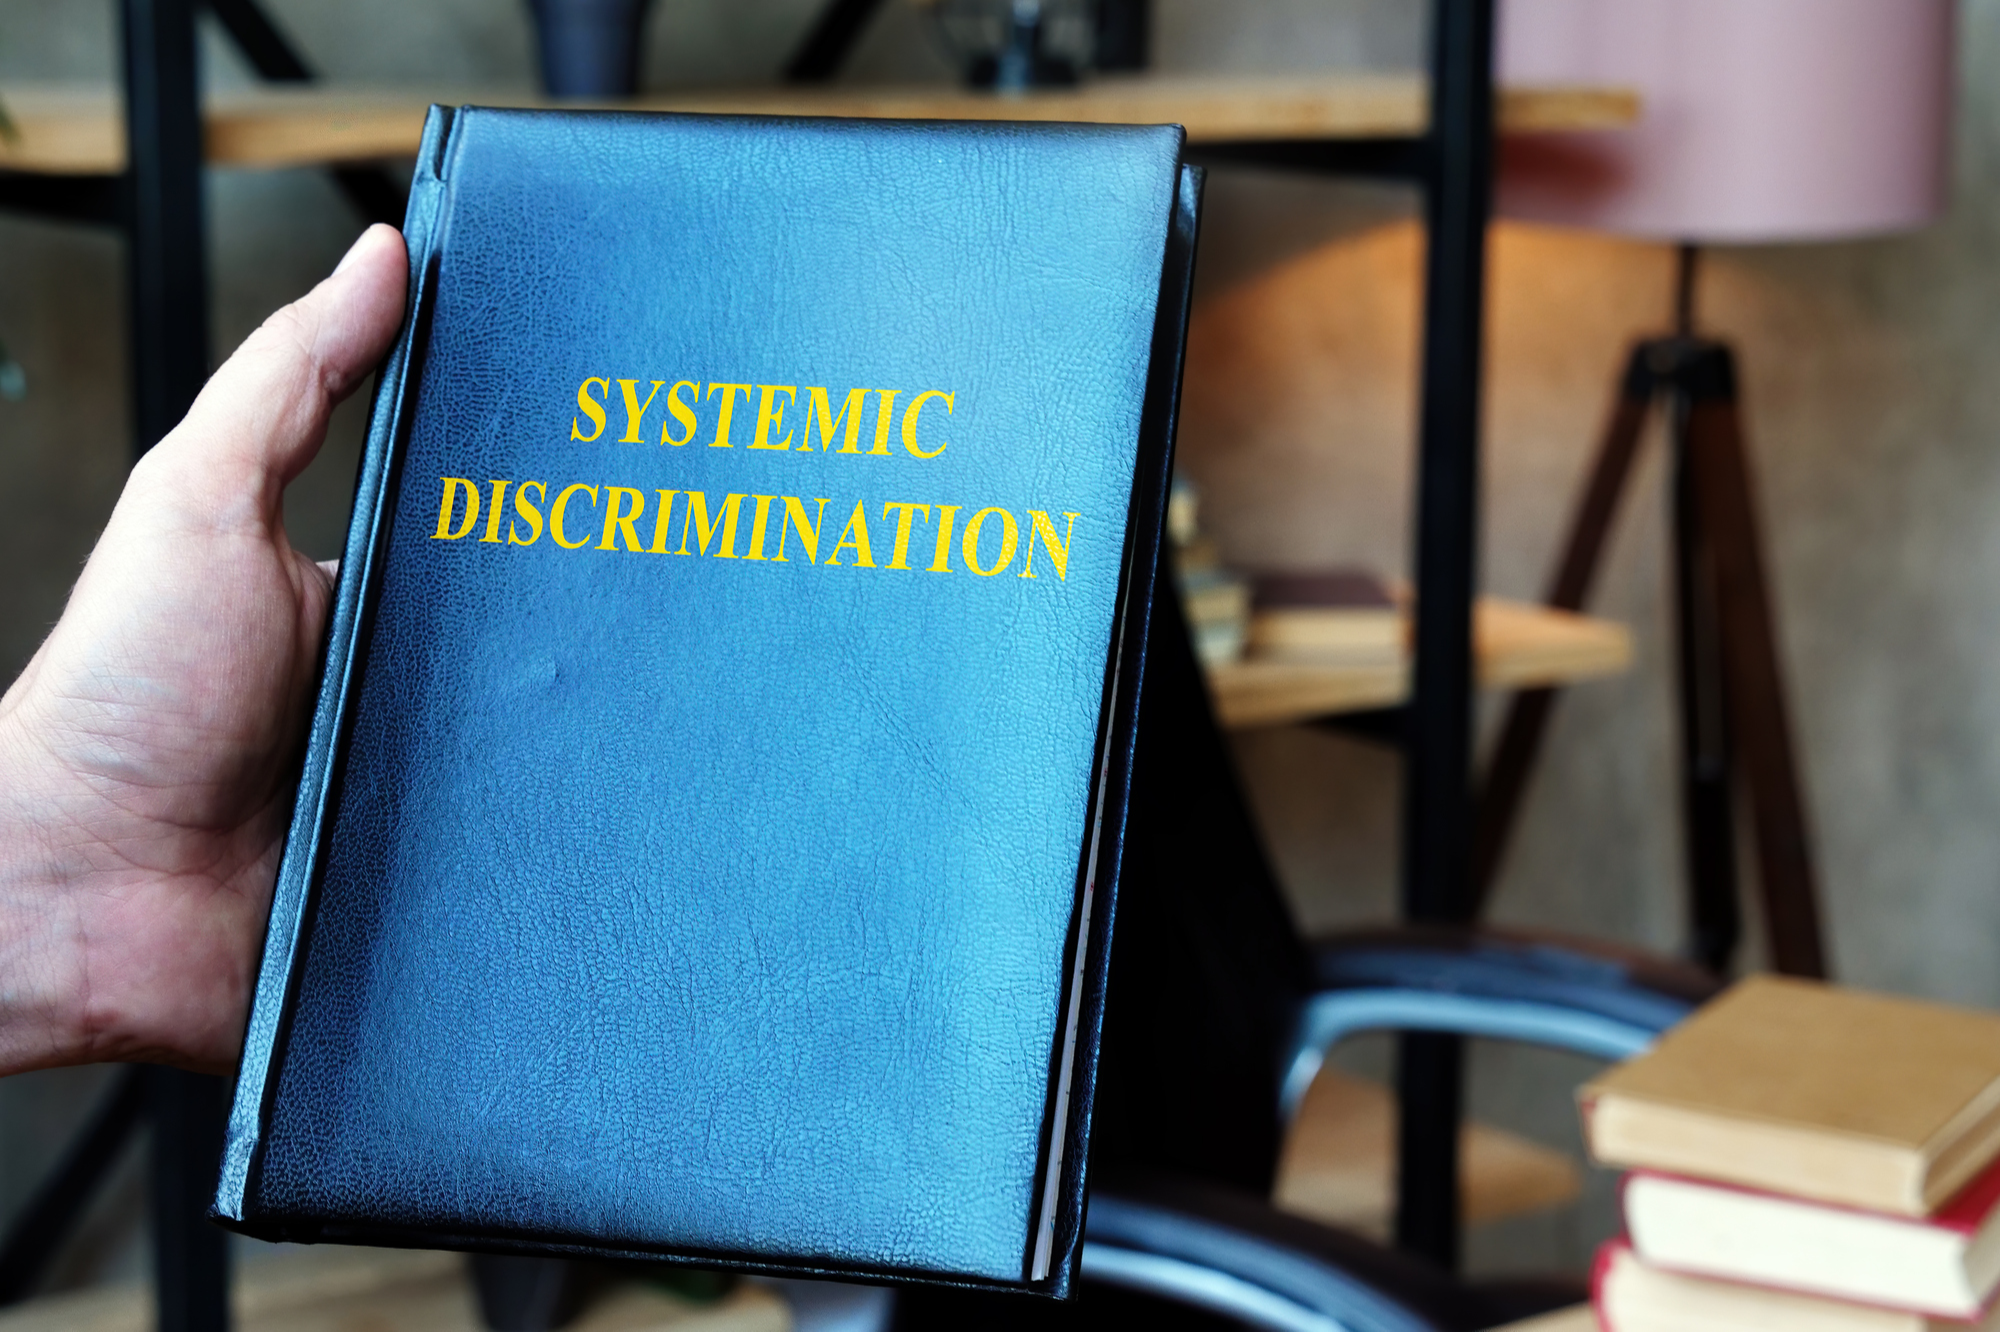 black leather bound book titled "systemic discrimination"